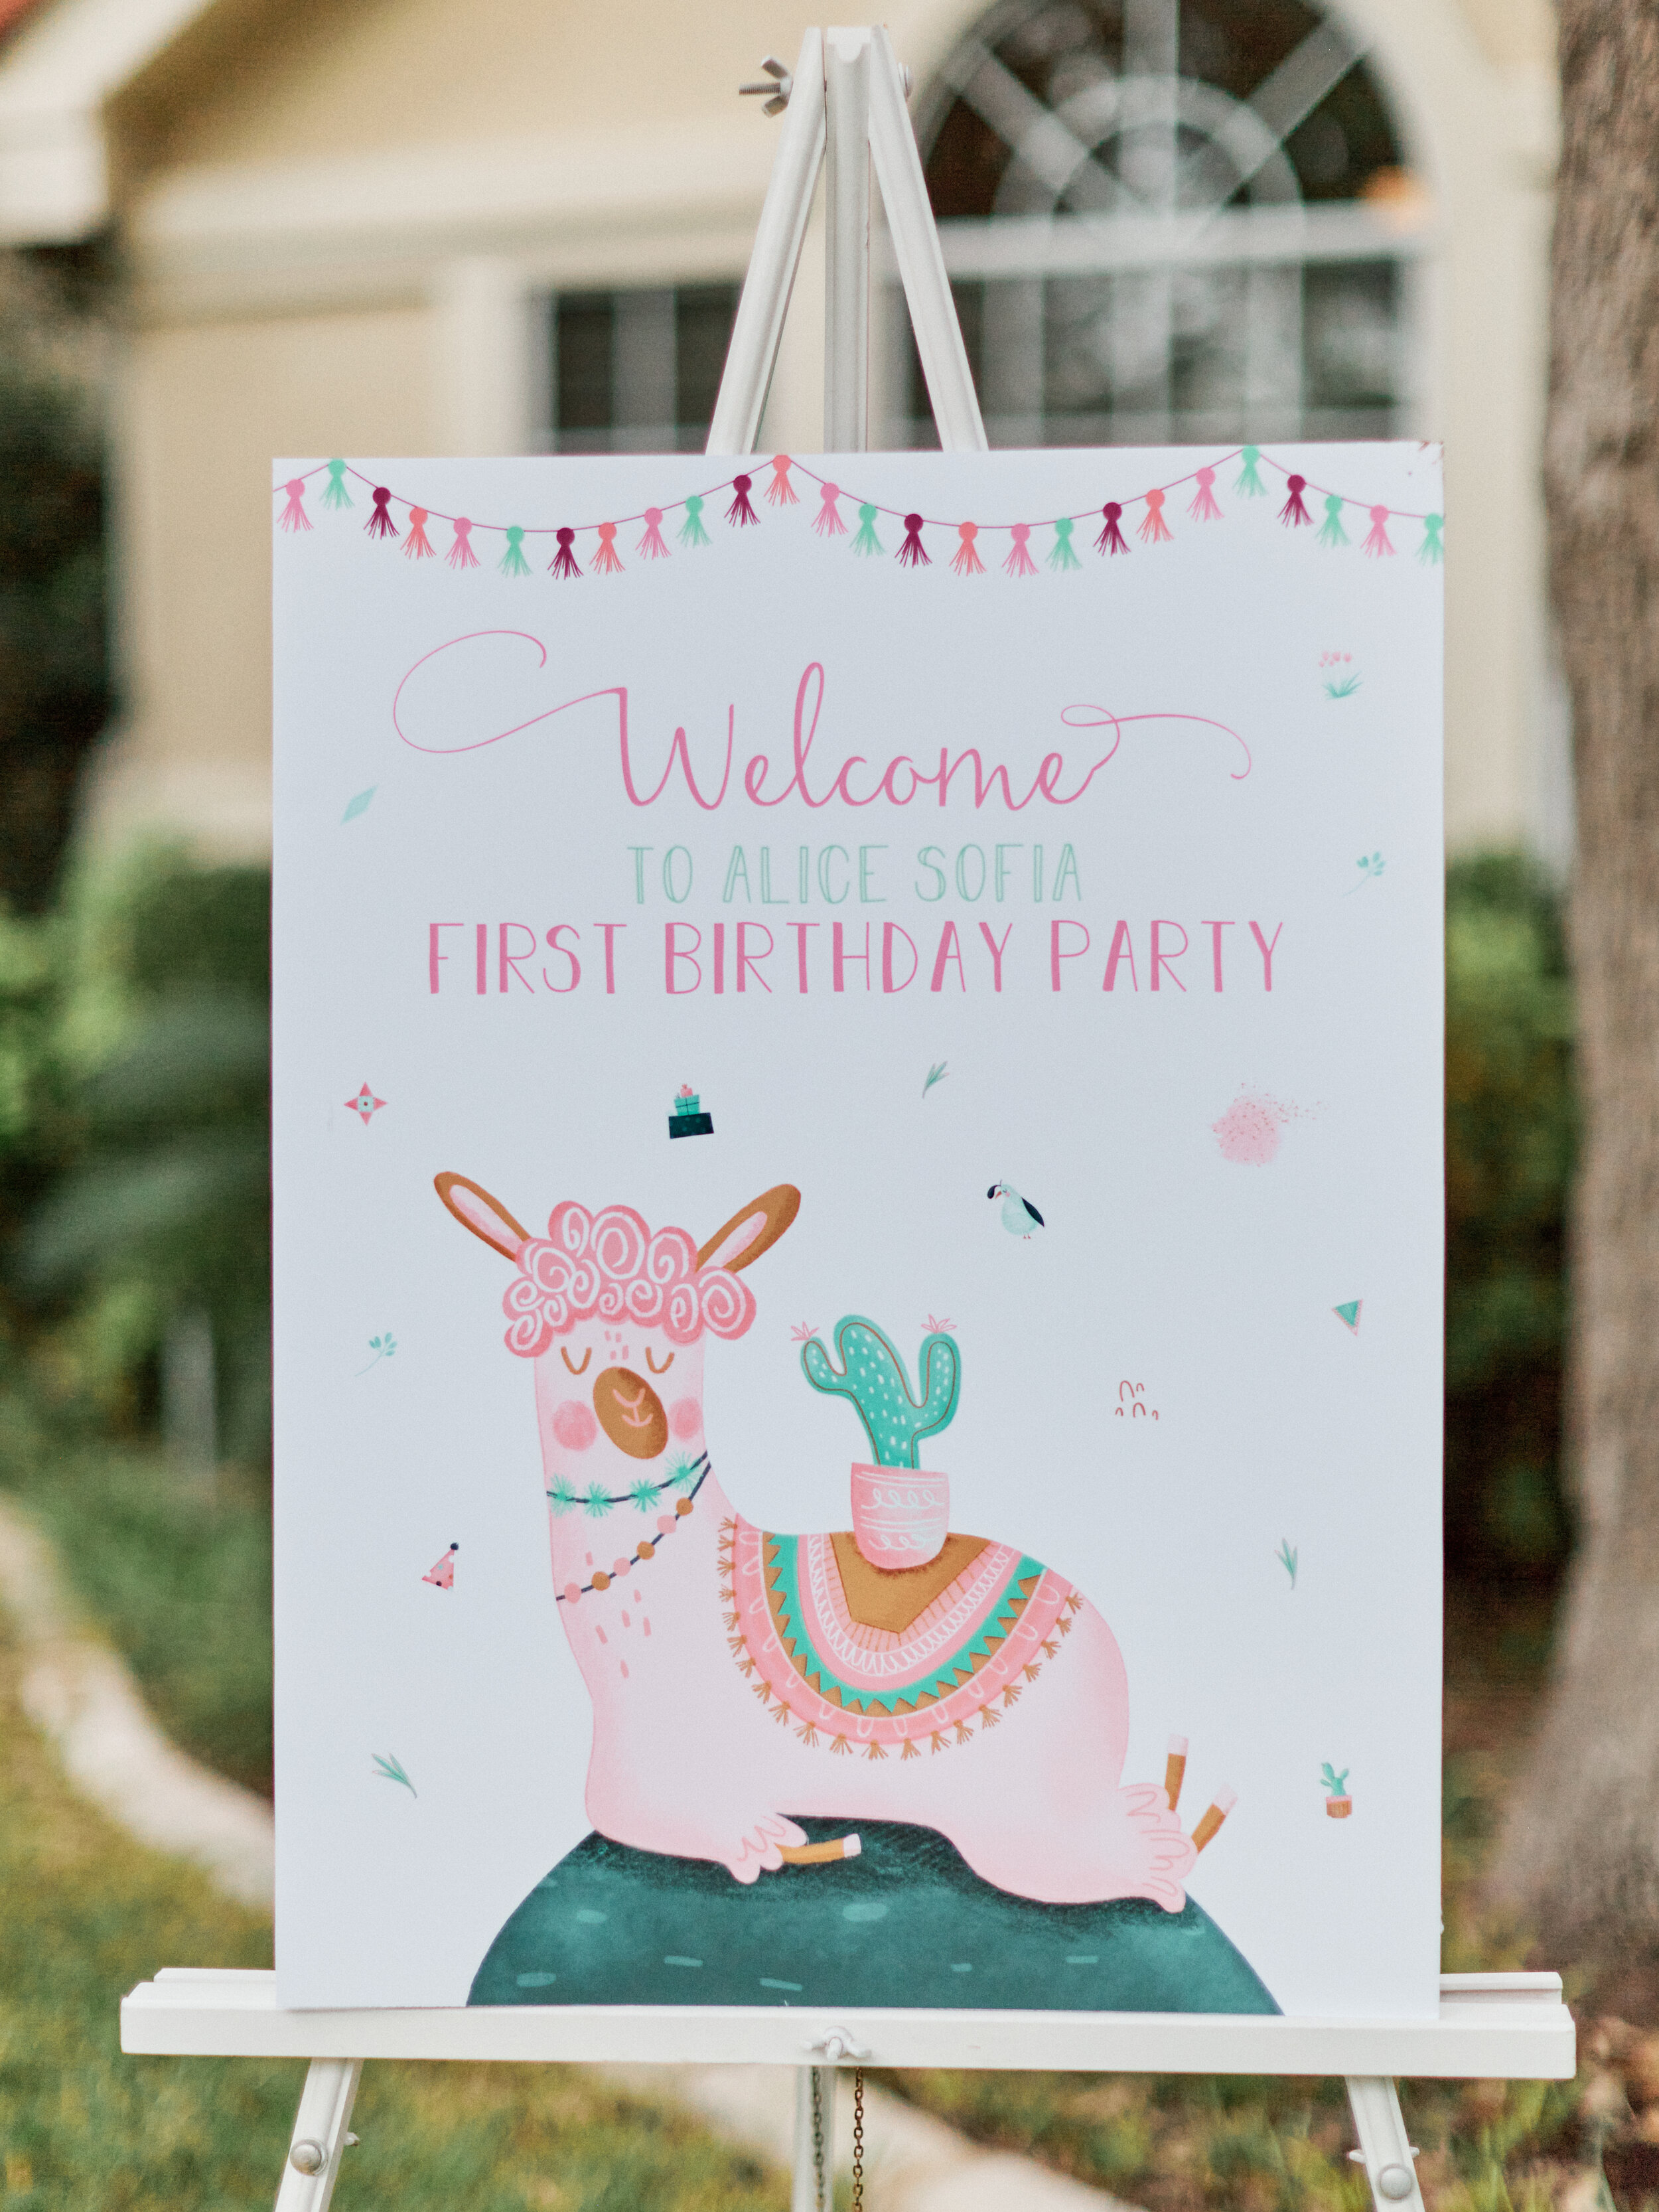 Llama Picnic Welcome Sign - get details and more party inspiration now at minteventdesign.com!